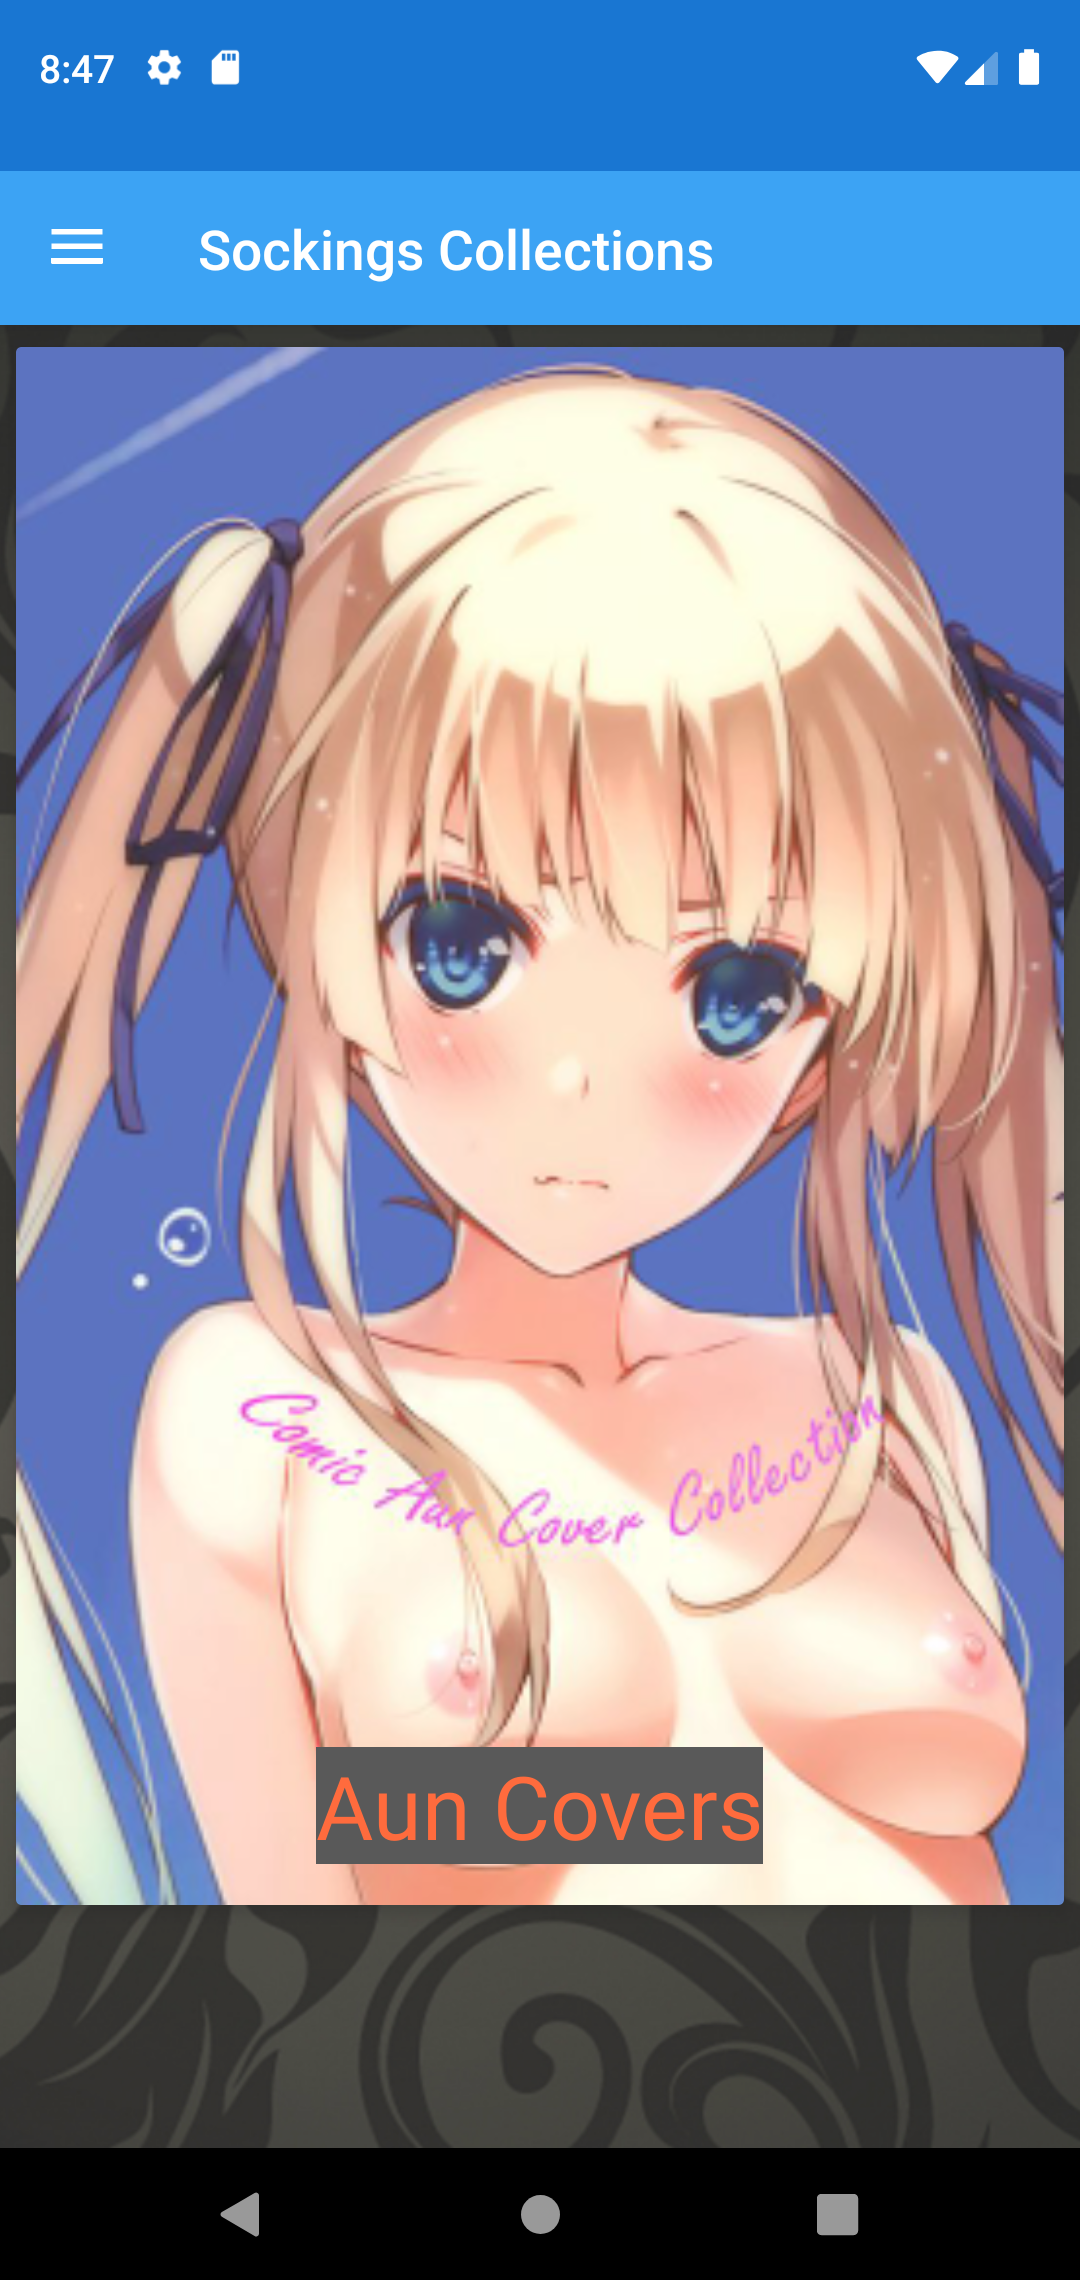 Sockings Collections download,adult,pics,apk,photos,apps,android,stockings,walpapers,hentai,sexy,aplikasi,porn,viewer,app,oictures,comics,pictures,nhentai,panties,hot,cosplay,anime,image,wallpaper,free